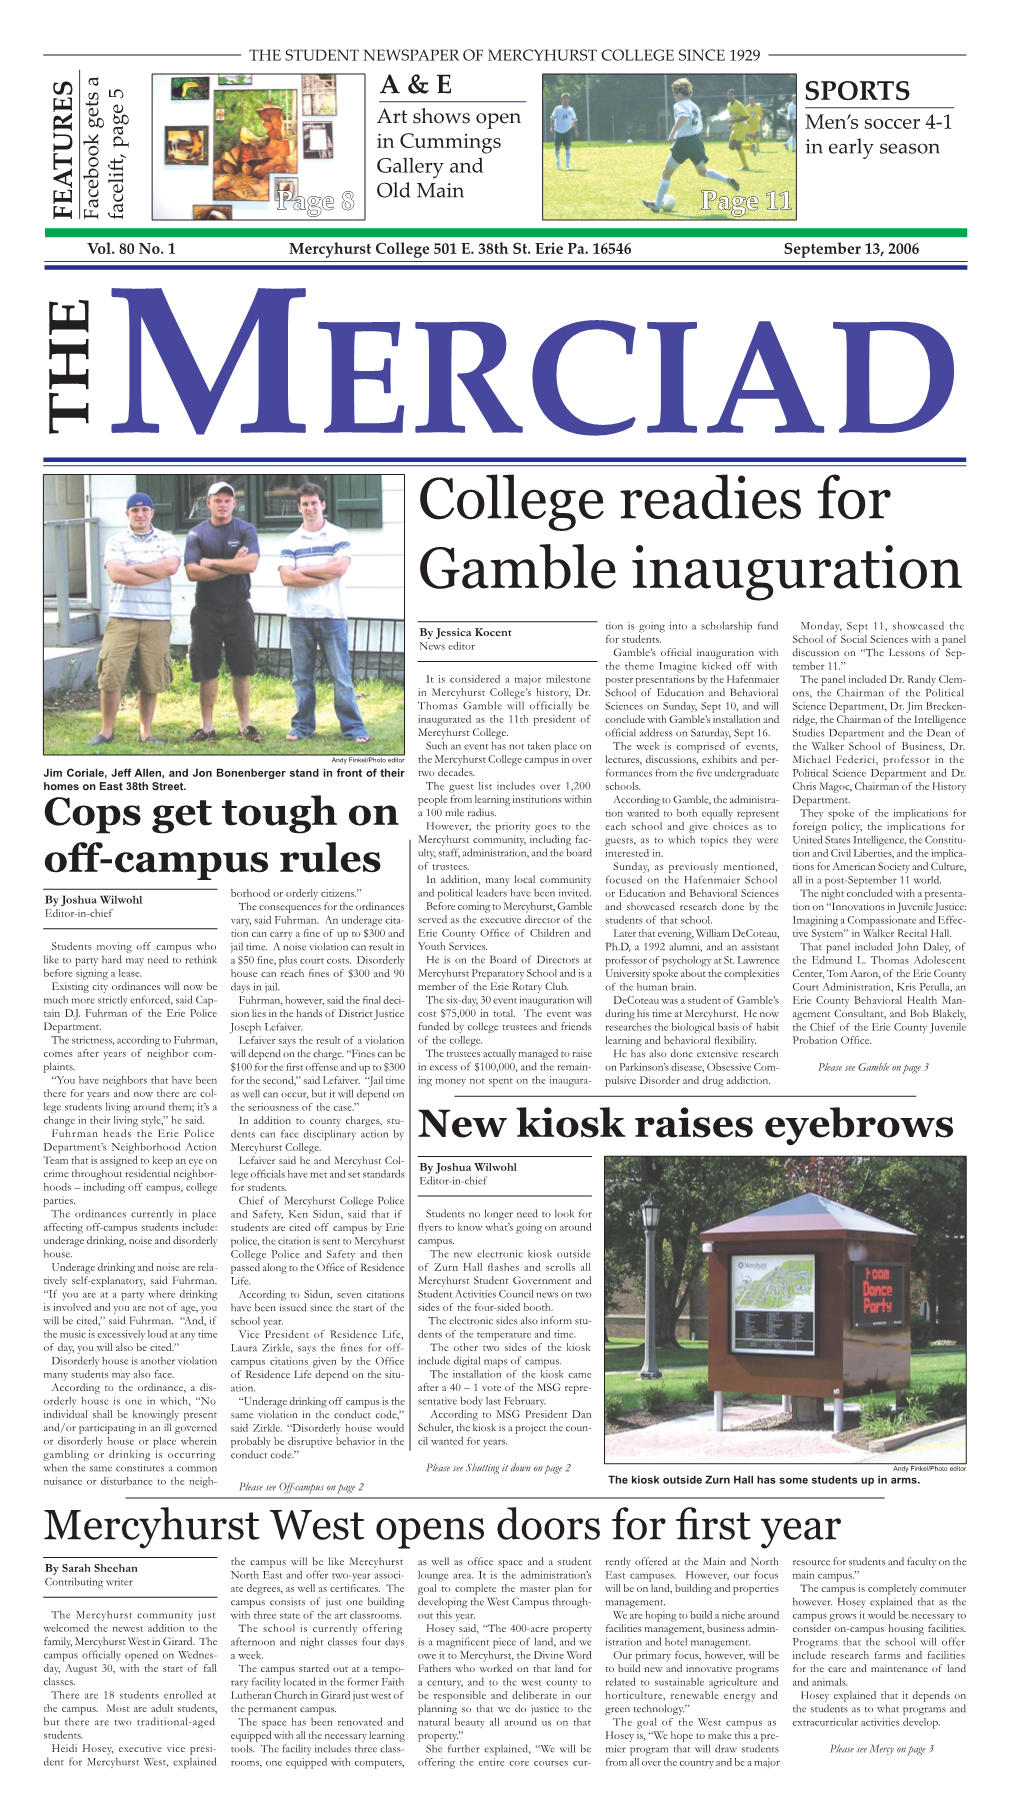 College Readies for Gamble Inauguration